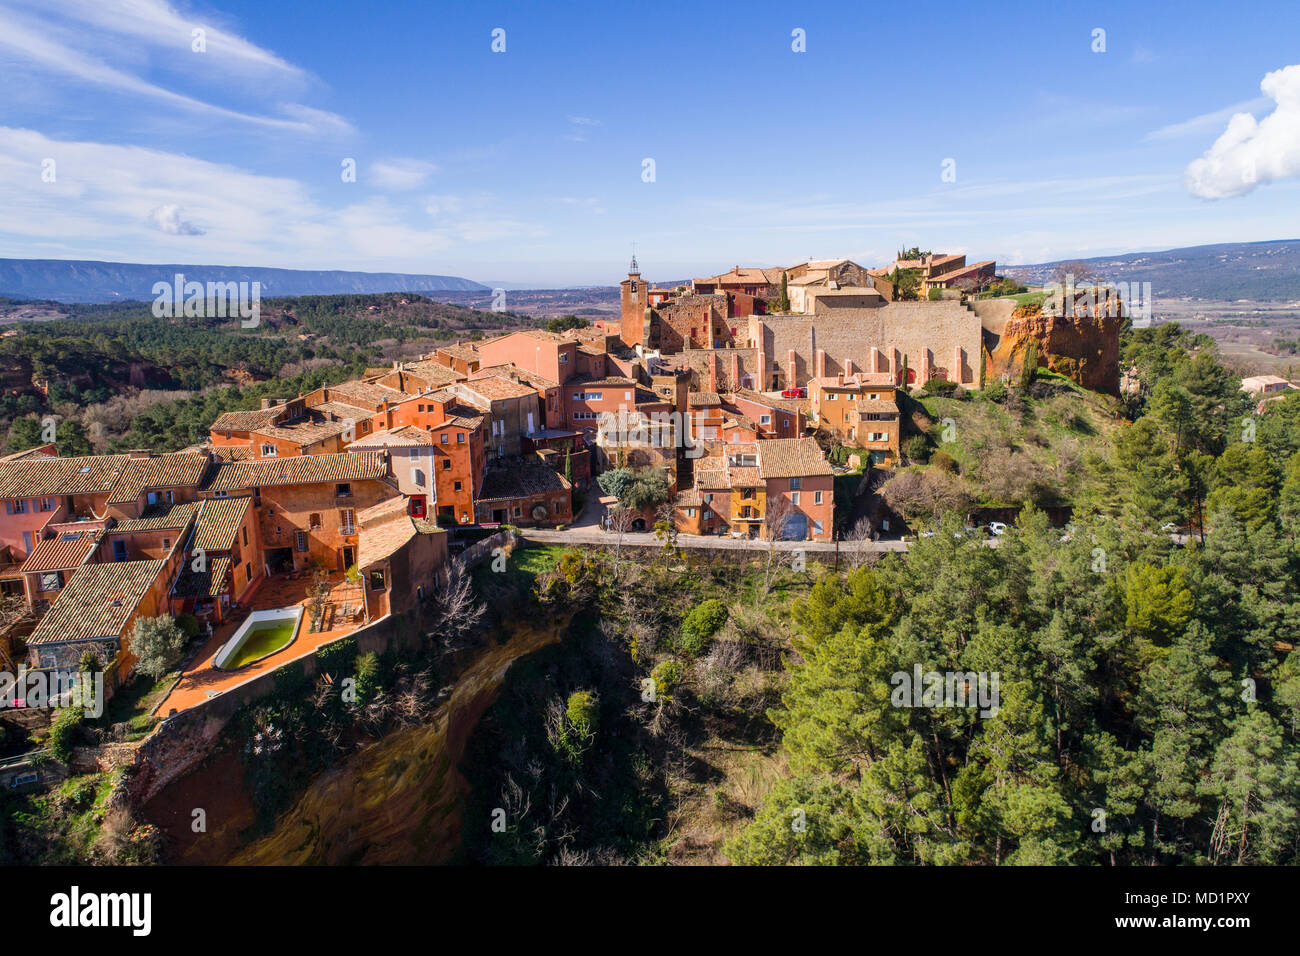 France, Vaucluse, Roussillon, Natural Regional Park of Luberon, labelled The Most Beautiful Villages of France, perched village with ochre facades, Stock Photo